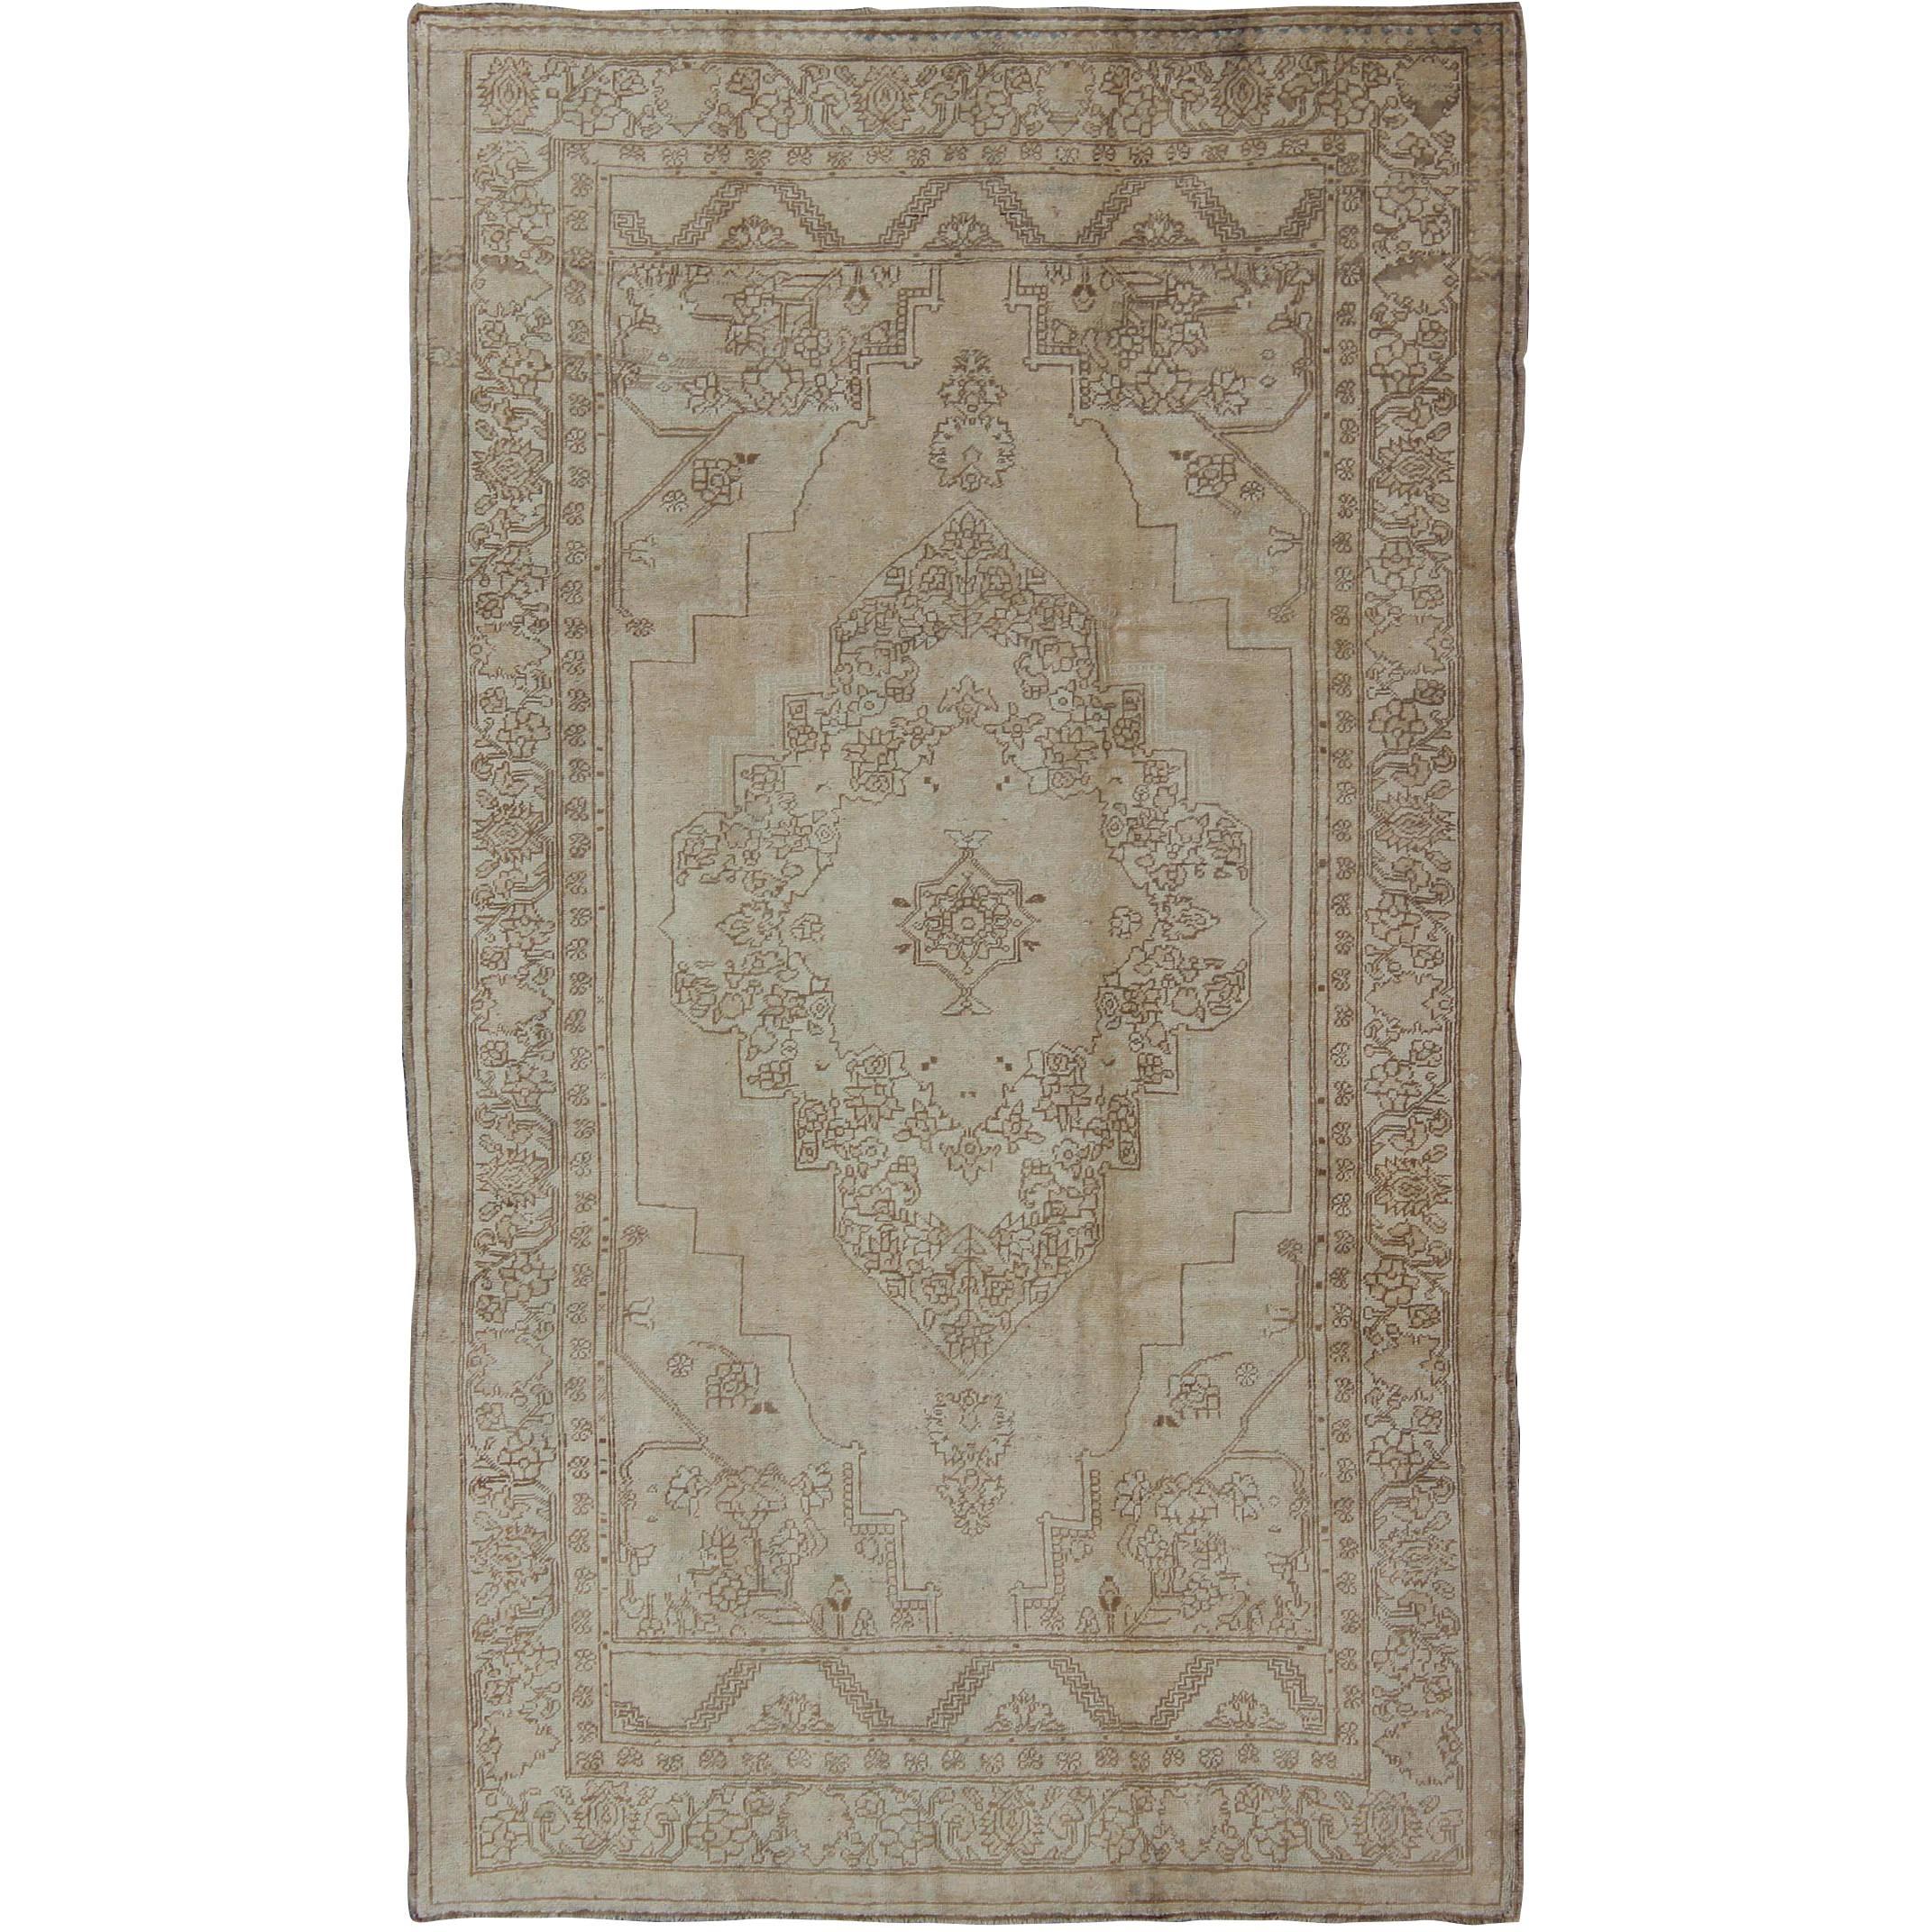 Vintage Turkish Oushak Rug in Light Colors, Sand, Taupe, Pale Green& Brown